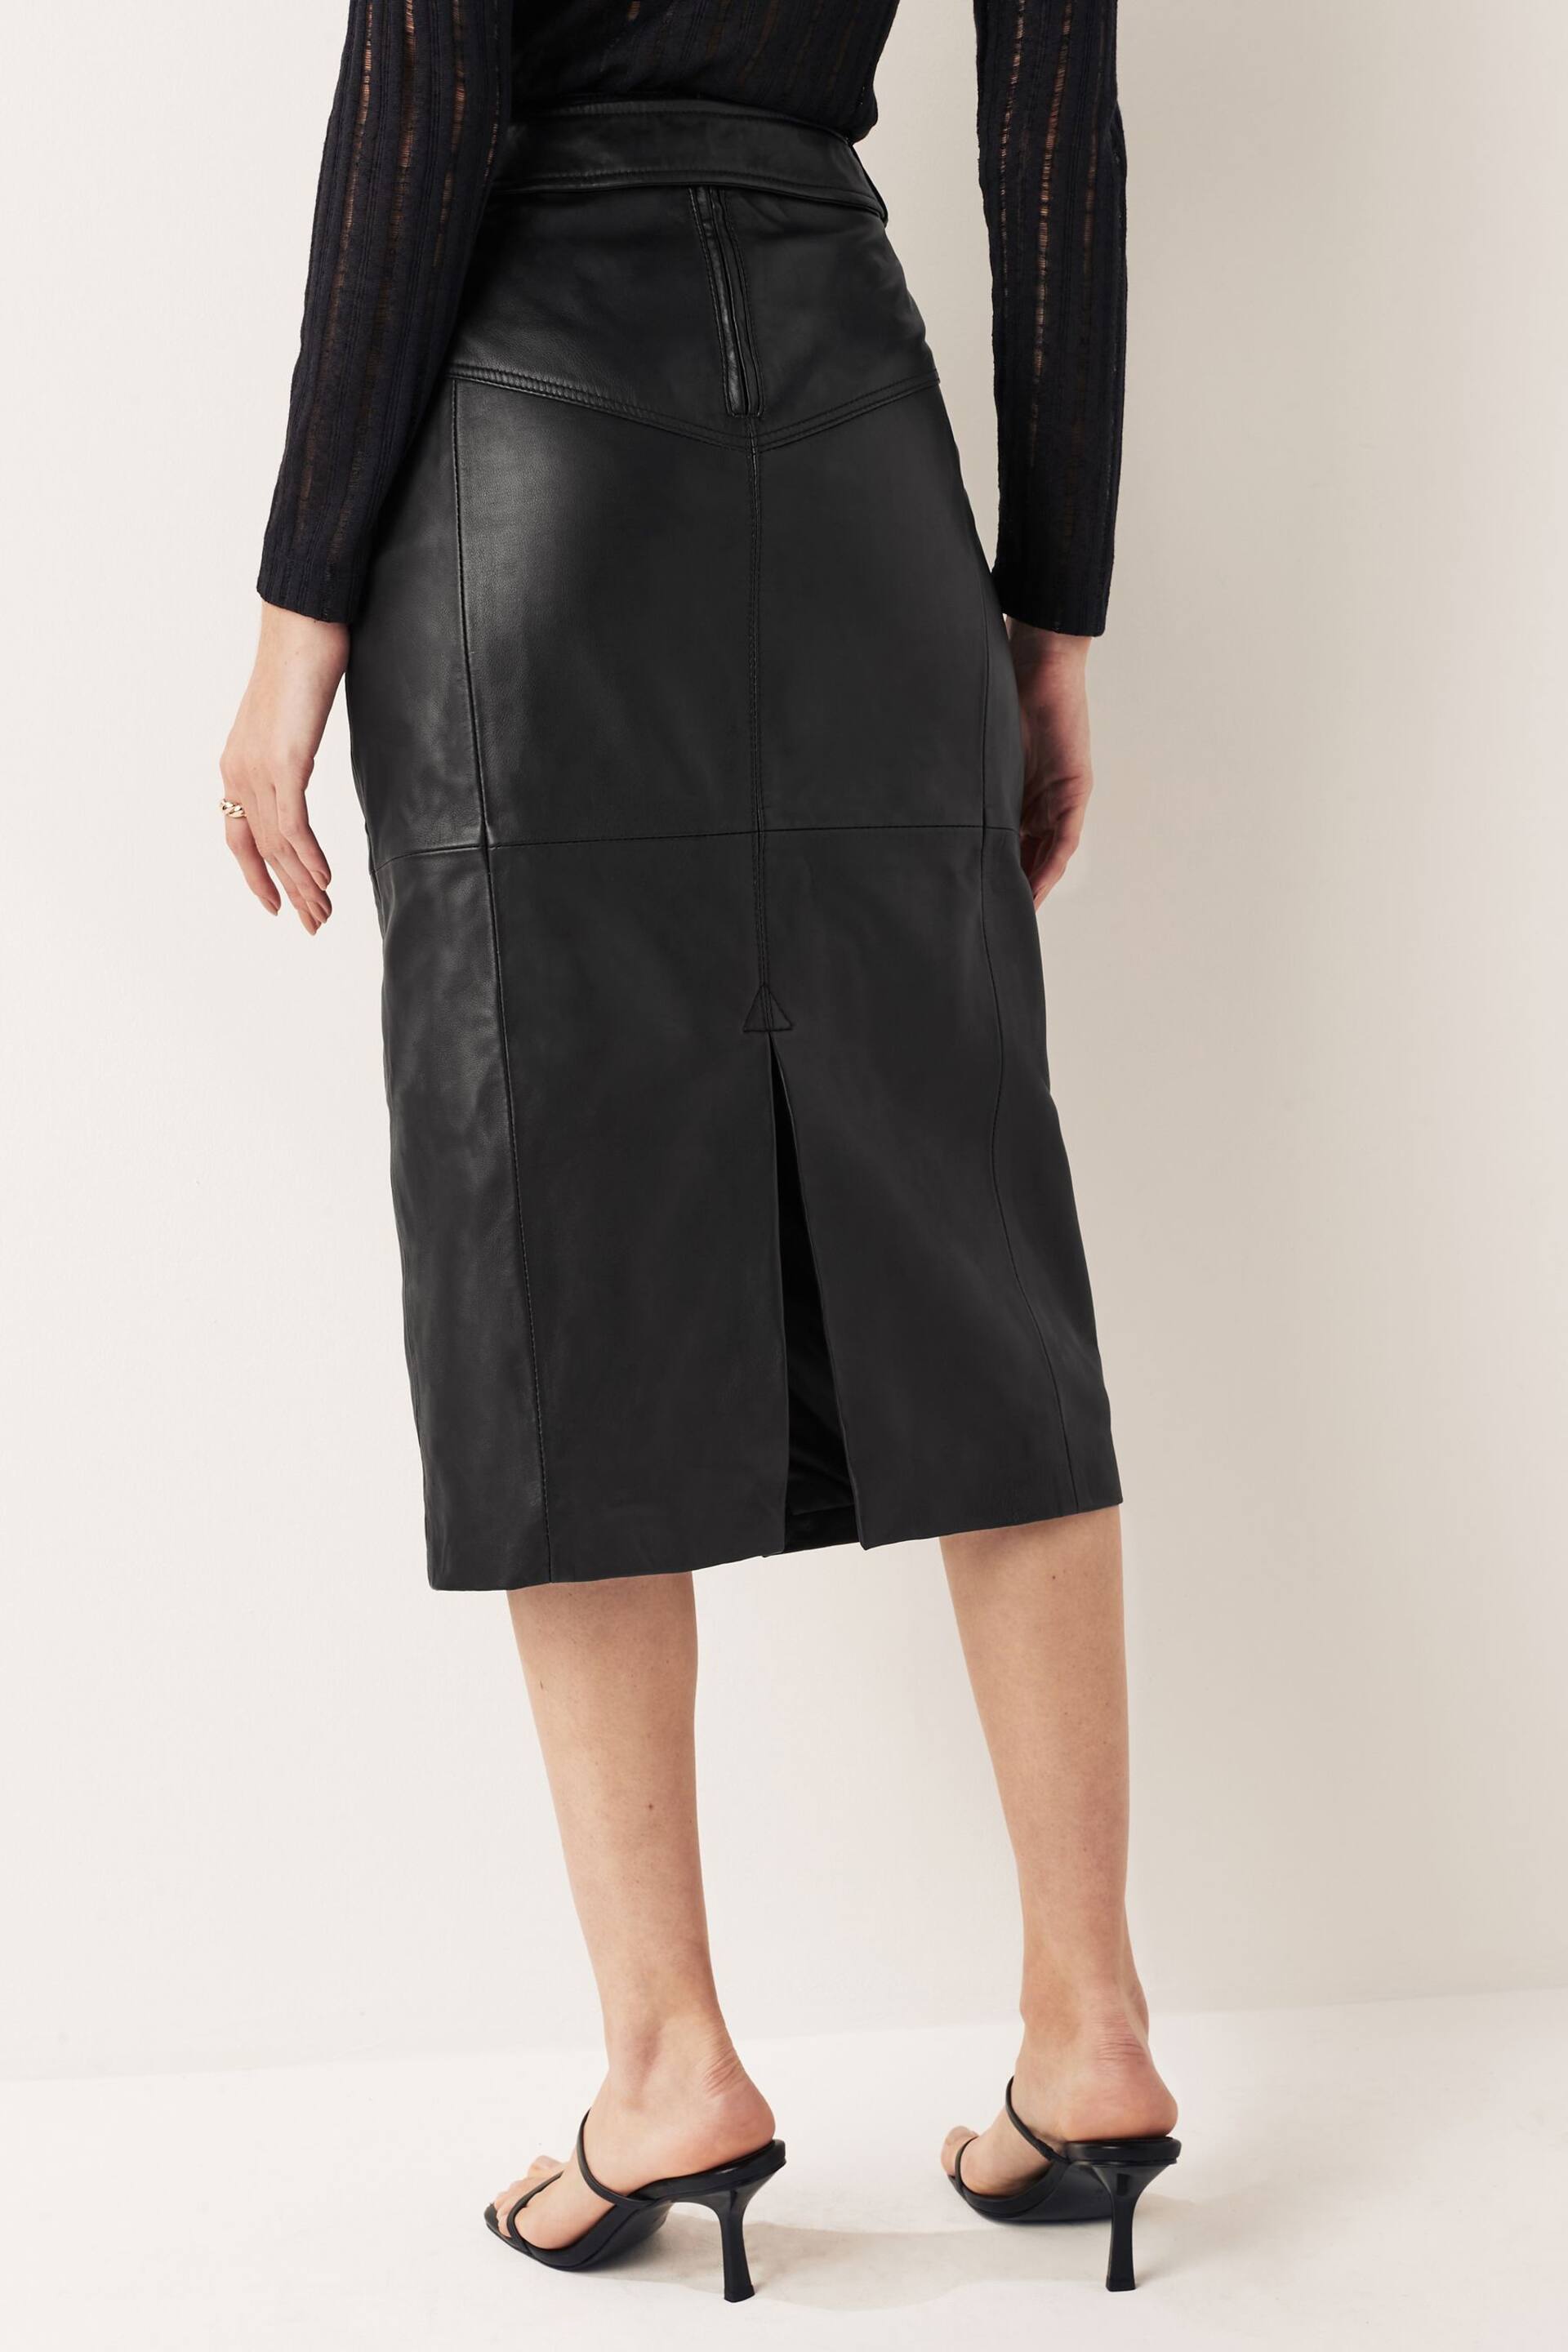 Urban Code Black Leather Front Split Midi Skirt With Removable Belt - Image 3 of 7